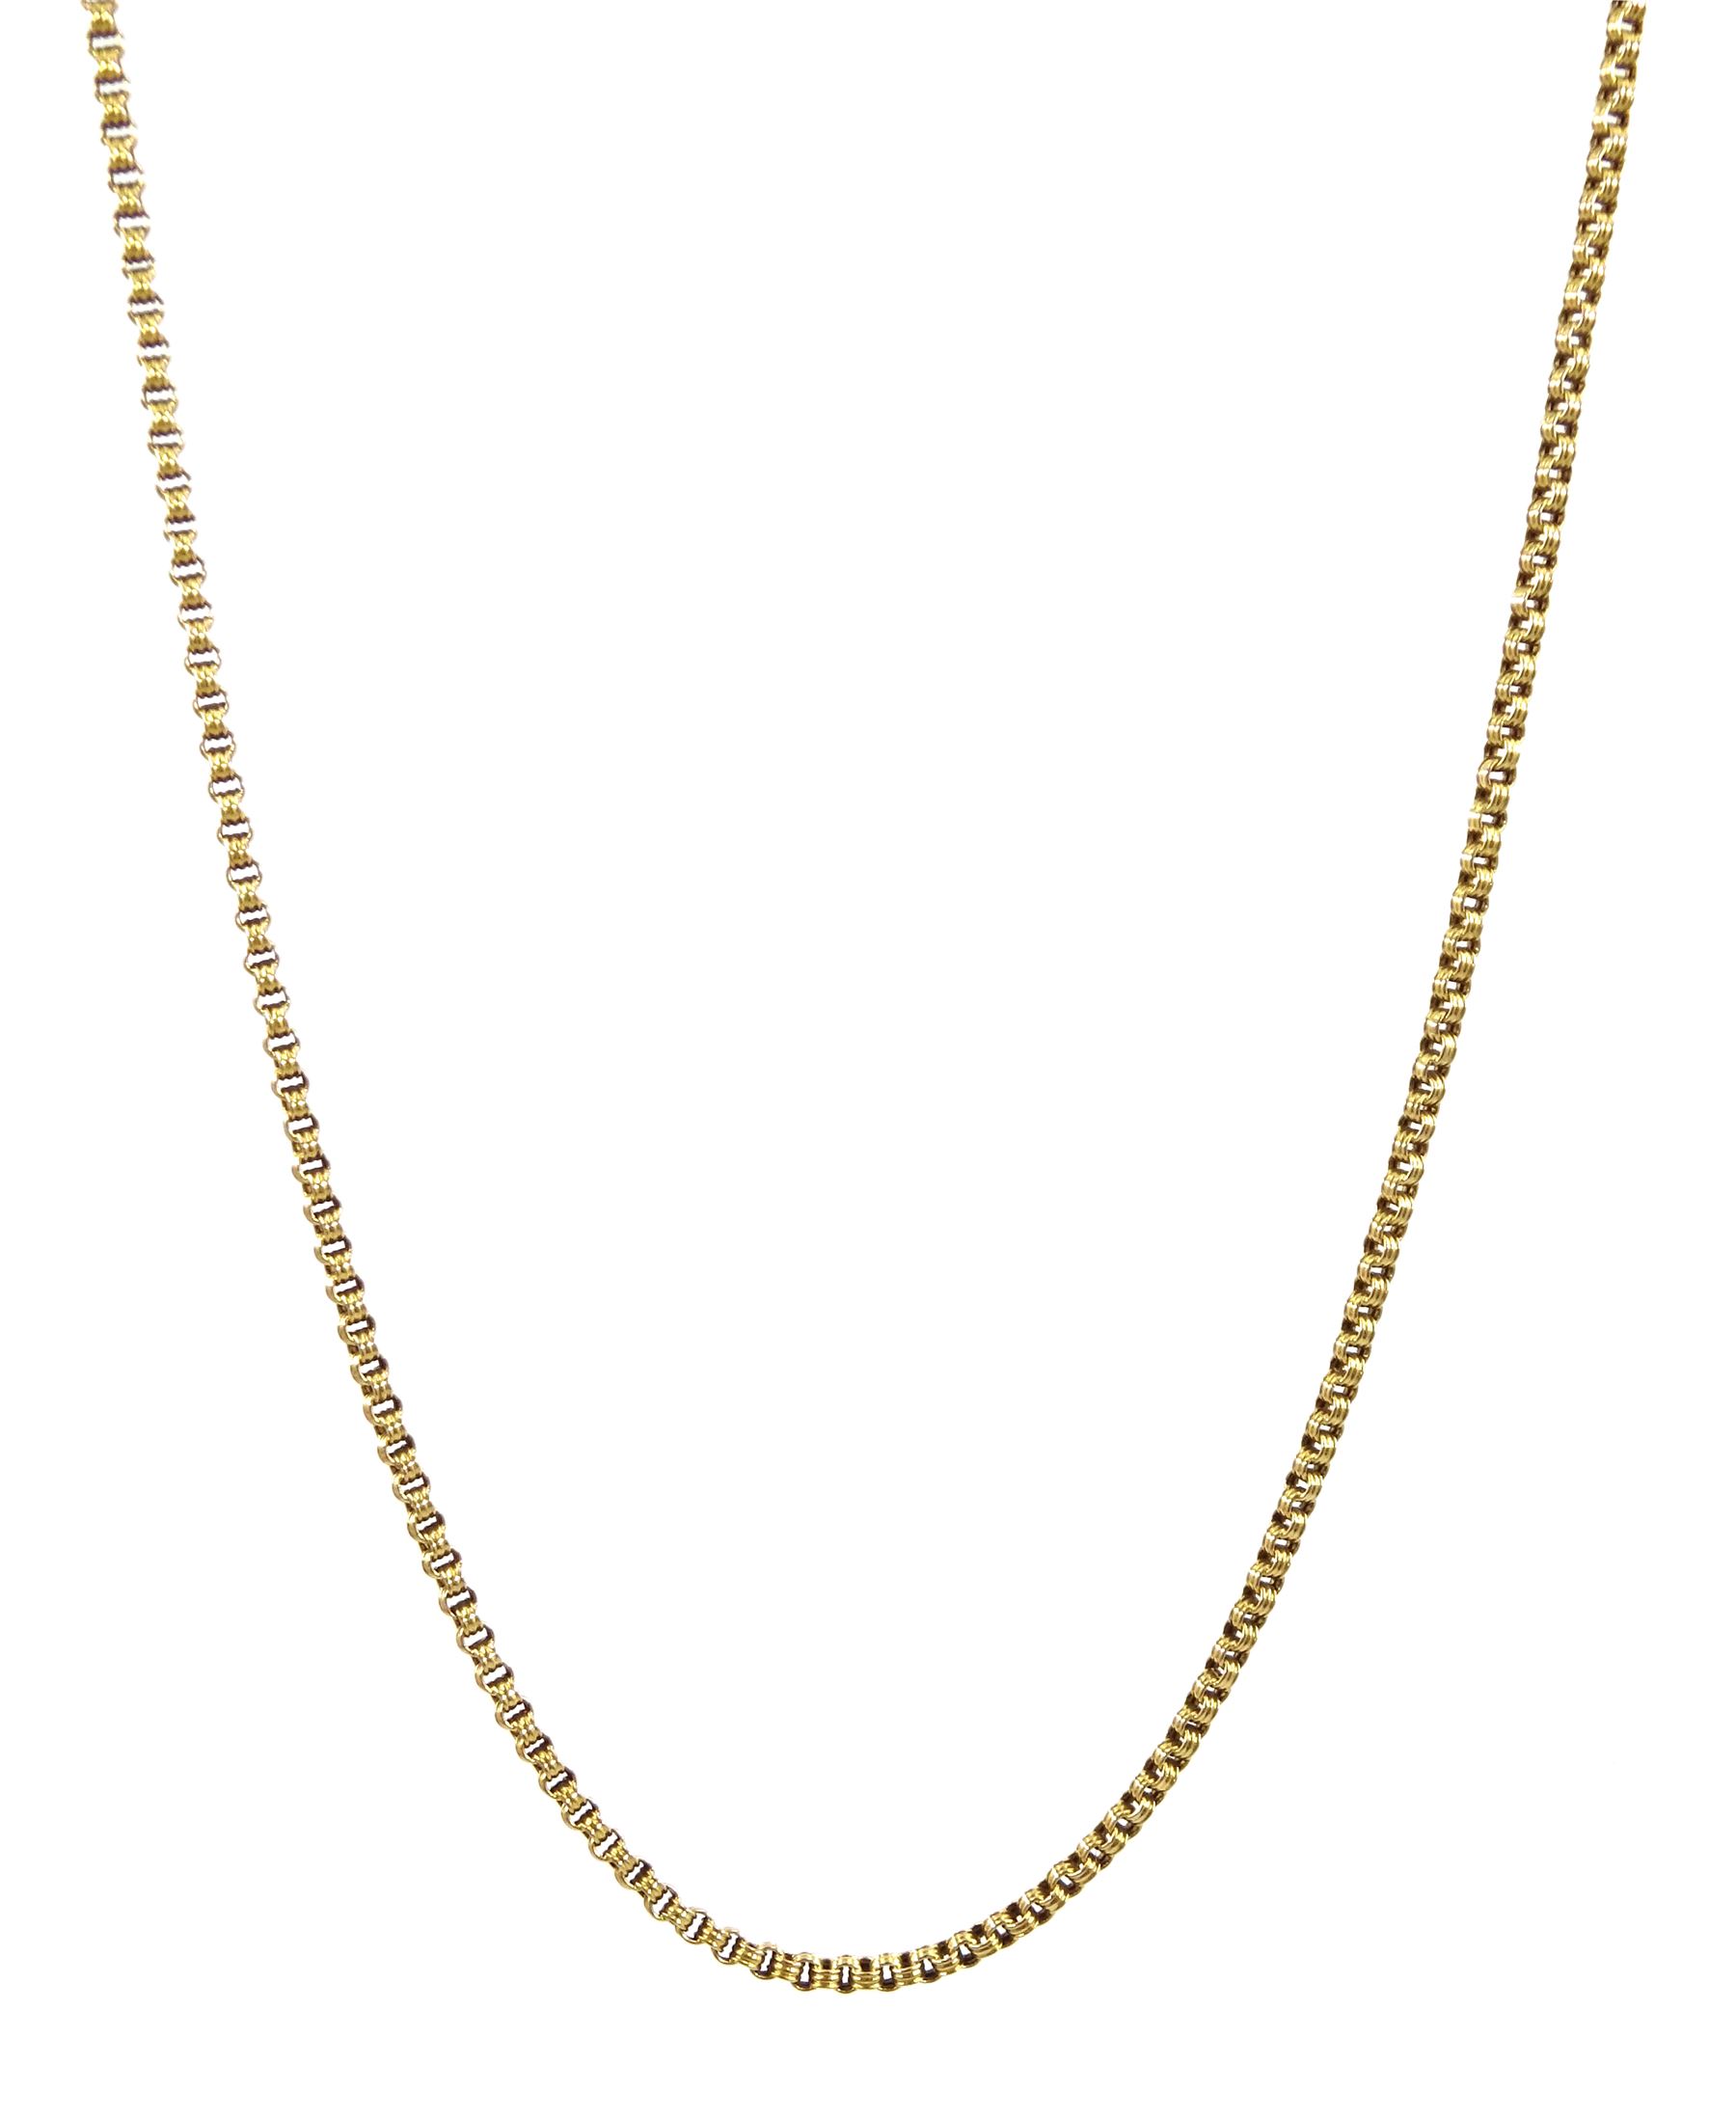 Early 20th century 15ct gold circular link chain necklace